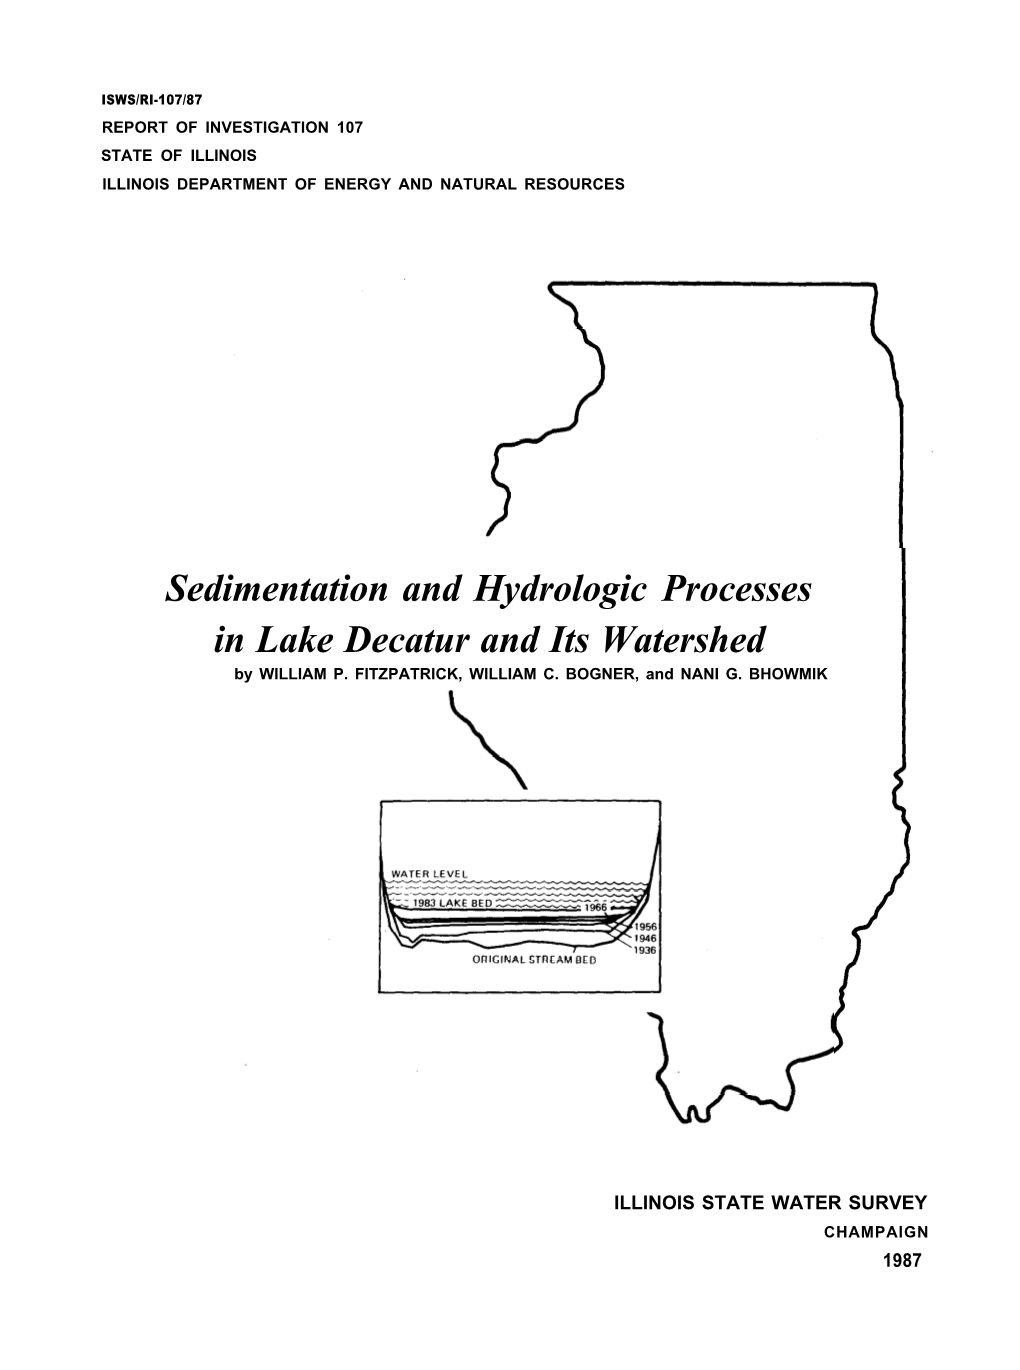 Sedimentation and Hydrologic Processes in Lake Decatur and Its Watershed by WILLIAM P